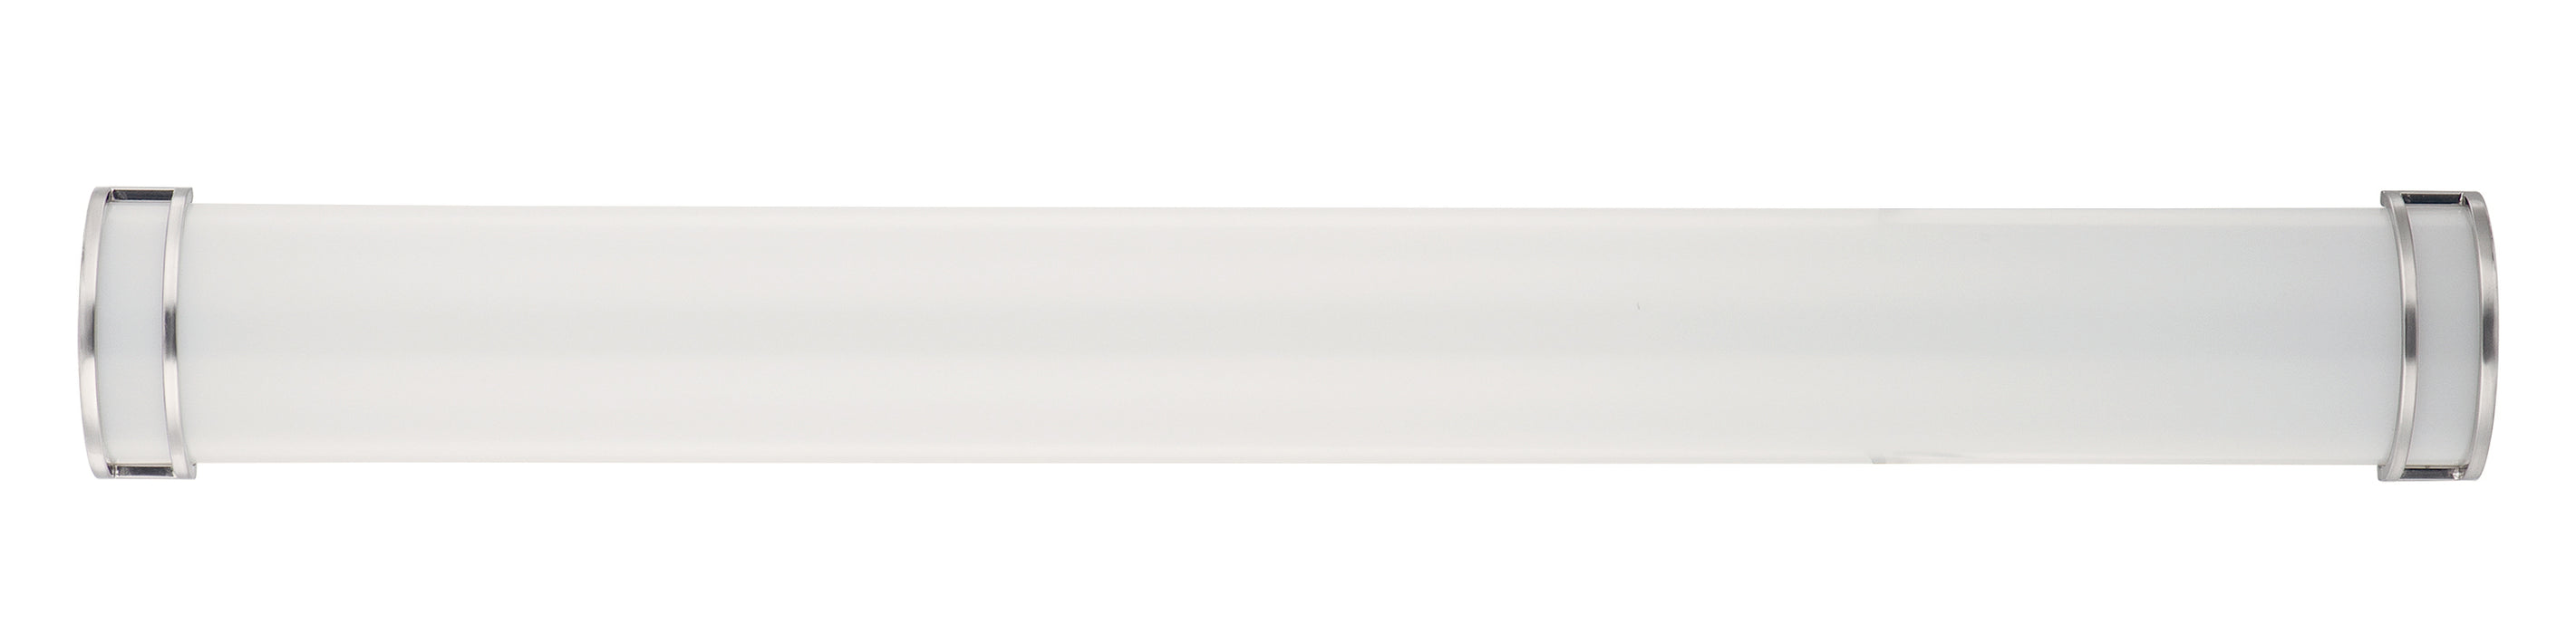 Linear LED-Wall Sconce